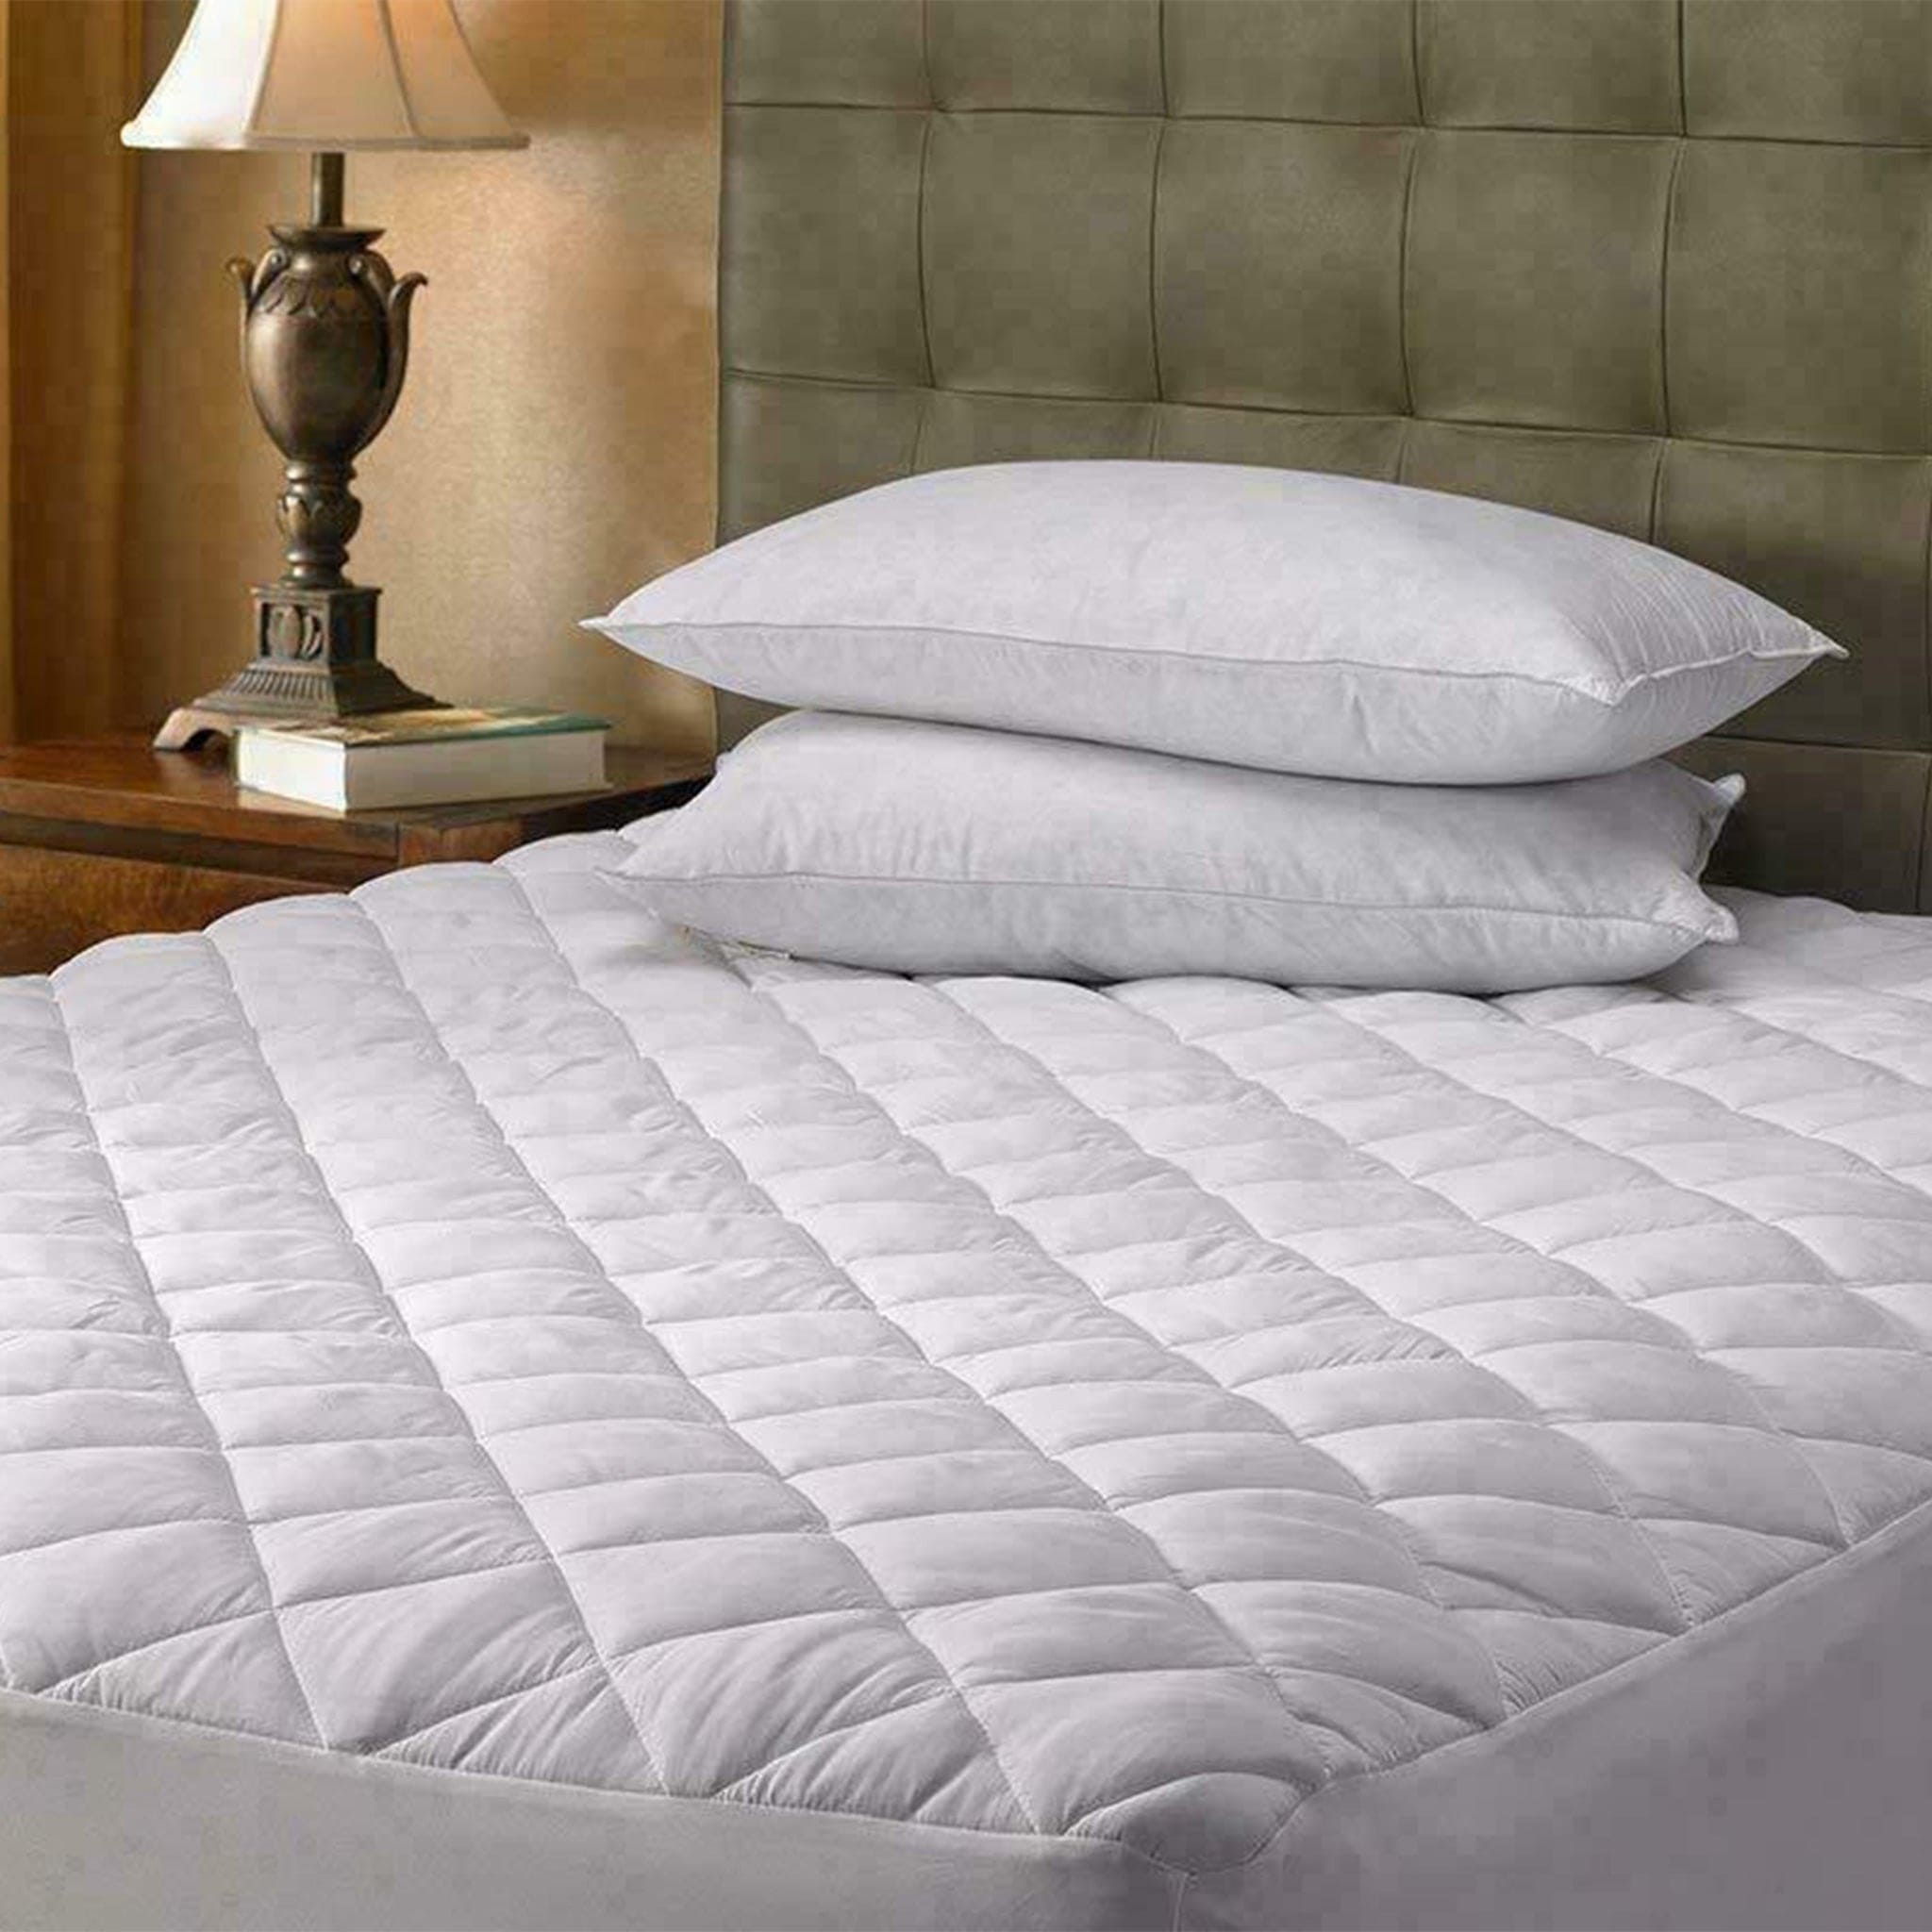 Water Proof Mattress Protector - Cotton Haven